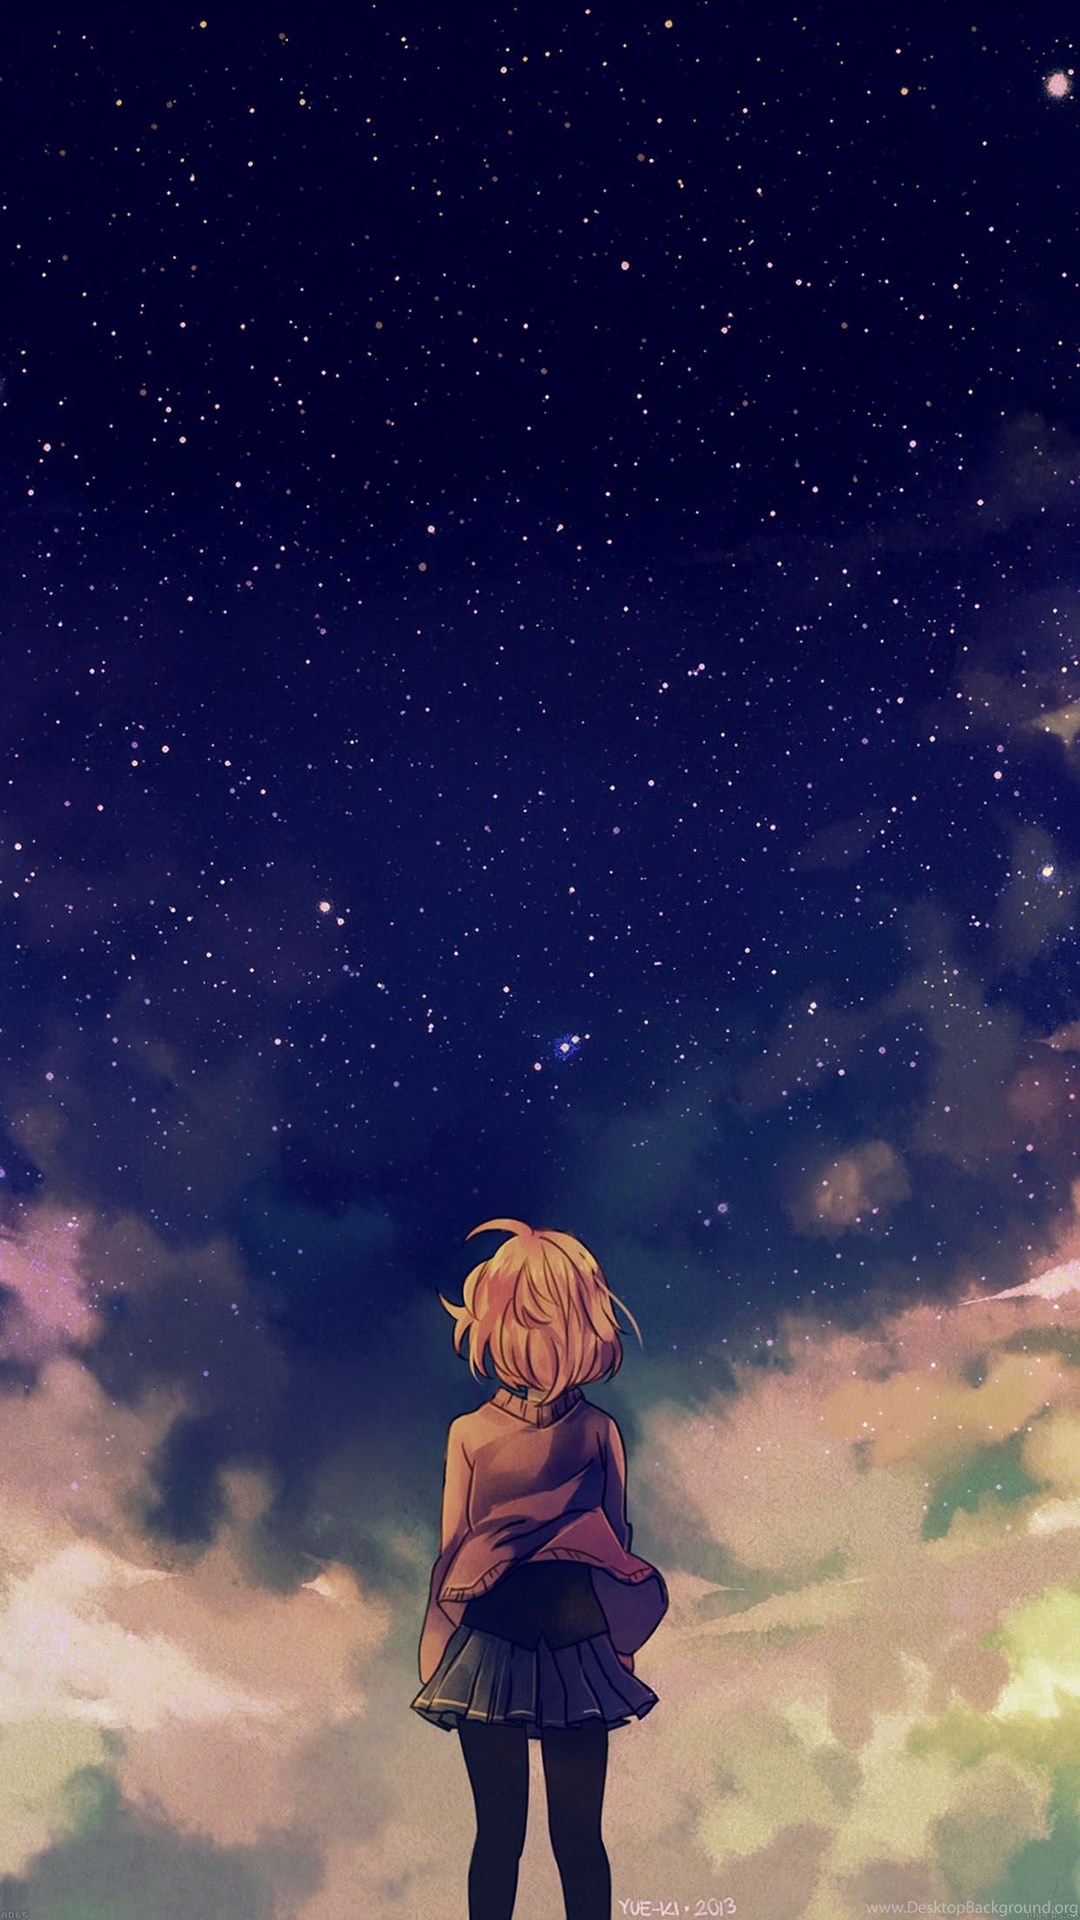 Anime Wallpapers Iphone 3gs